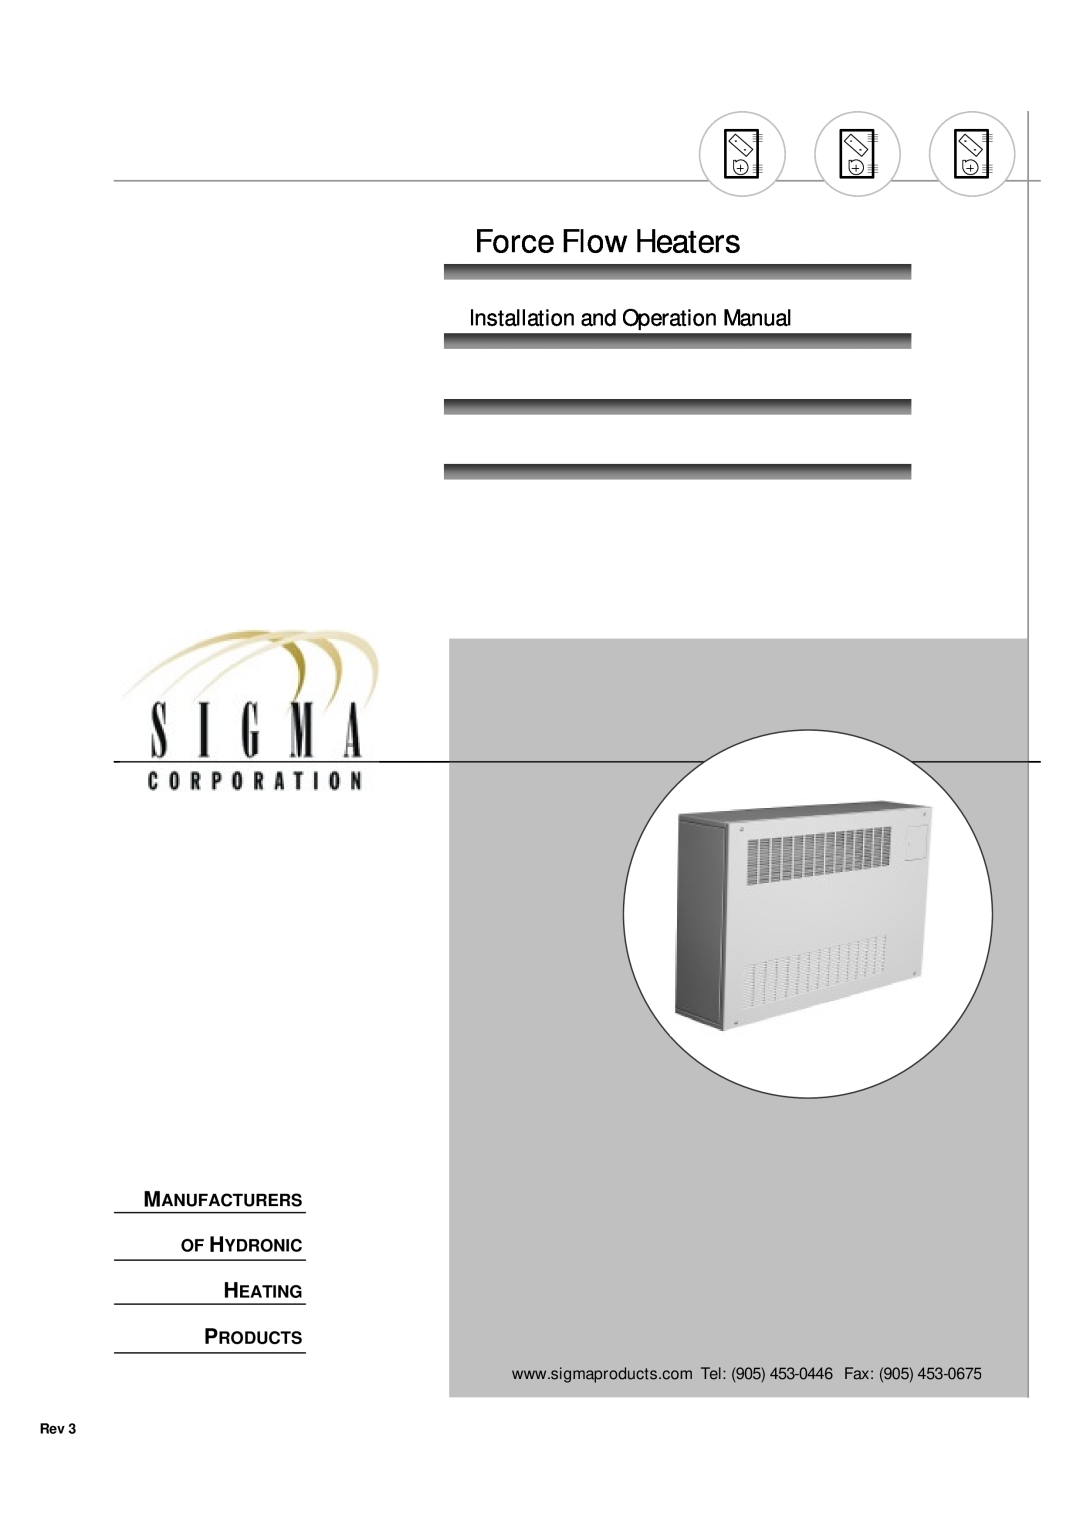 Sigma Force Flow Heaters operation manual Fax, Manufacturers, Of Hydronic, Heating, Products 